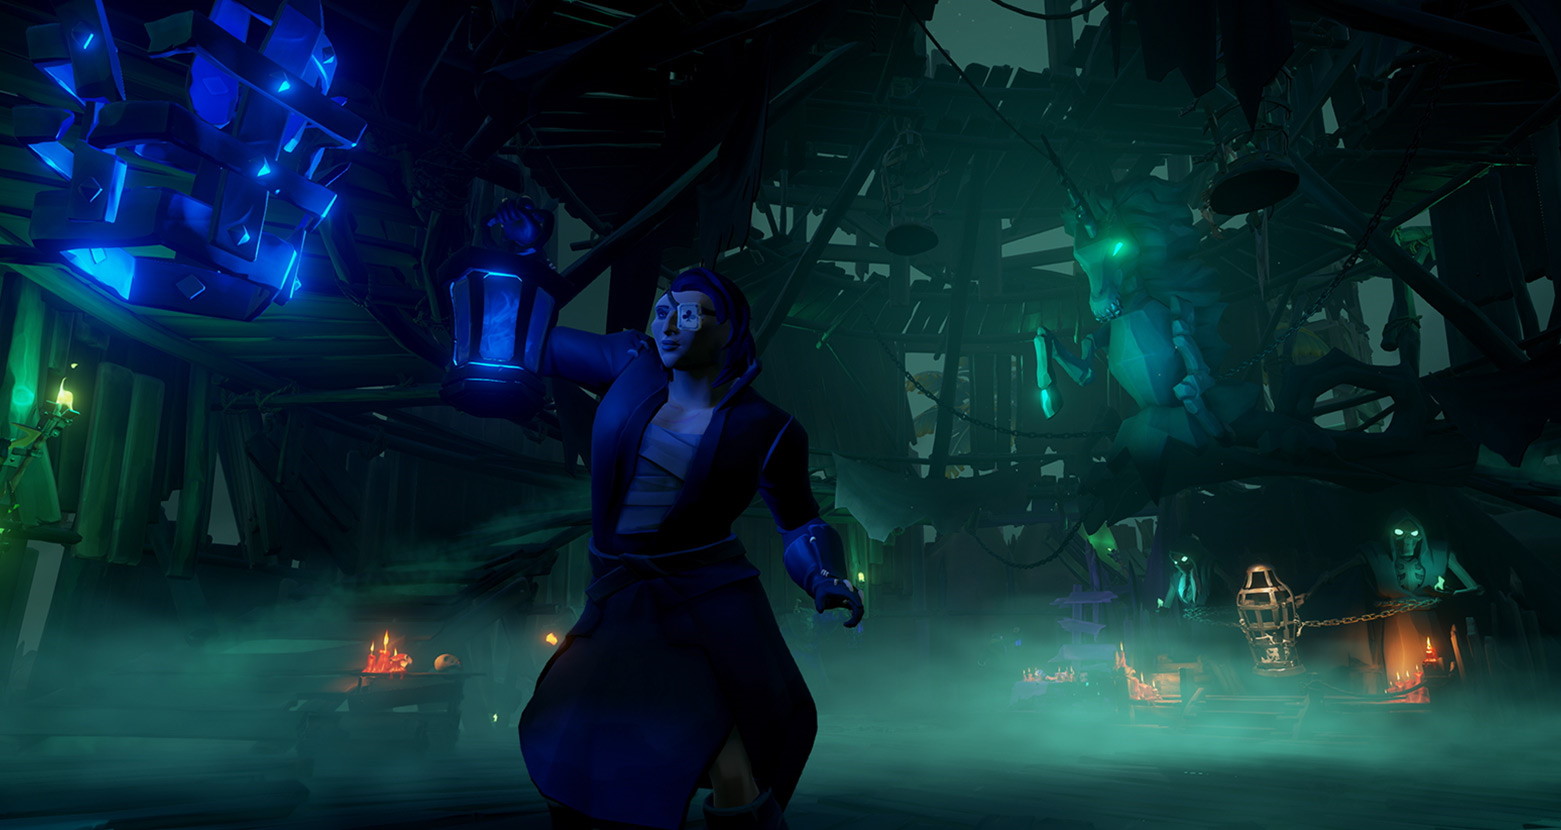 The Sea of Thieves Halloween update adds new skeletons and the Fort of